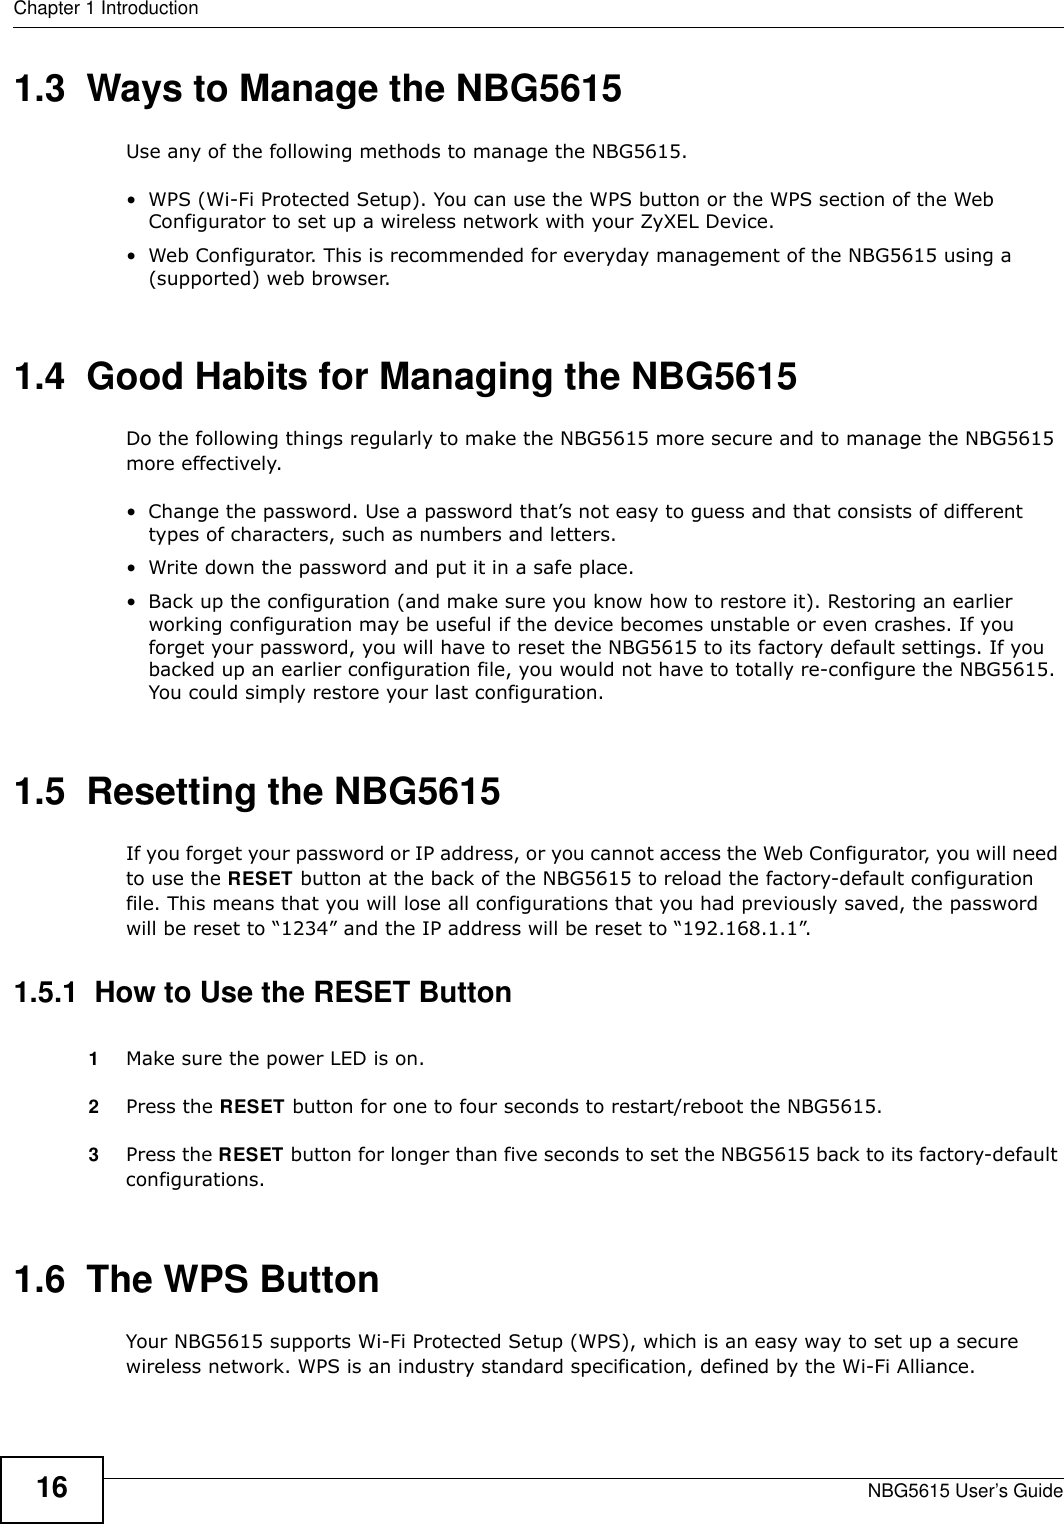 Chapter 1 IntroductionNBG5615 User’s Guide161.3  Ways to Manage the NBG5615Use any of the following methods to manage the NBG5615.• WPS (Wi-Fi Protected Setup). You can use the WPS button or the WPS section of the Web Configurator to set up a wireless network with your ZyXEL Device.• Web Configurator. This is recommended for everyday management of the NBG5615 using a (supported) web browser.1.4  Good Habits for Managing the NBG5615Do the following things regularly to make the NBG5615 more secure and to manage the NBG5615 more effectively.• Change the password. Use a password that’s not easy to guess and that consists of different types of characters, such as numbers and letters.• Write down the password and put it in a safe place.• Back up the configuration (and make sure you know how to restore it). Restoring an earlier working configuration may be useful if the device becomes unstable or even crashes. If you forget your password, you will have to reset the NBG5615 to its factory default settings. If you backed up an earlier configuration file, you would not have to totally re-configure the NBG5615. You could simply restore your last configuration.1.5  Resetting the NBG5615If you forget your password or IP address, or you cannot access the Web Configurator, you will need to use the RESET button at the back of the NBG5615 to reload the factory-default configuration file. This means that you will lose all configurations that you had previously saved, the password will be reset to “1234” and the IP address will be reset to “192.168.1.1”.1.5.1  How to Use the RESET Button1Make sure the power LED is on.2Press the RESET button for one to four seconds to restart/reboot the NBG5615.3Press the RESET button for longer than five seconds to set the NBG5615 back to its factory-default configurations.1.6  The WPS ButtonYour NBG5615 supports Wi-Fi Protected Setup (WPS), which is an easy way to set up a secure wireless network. WPS is an industry standard specification, defined by the Wi-Fi Alliance.